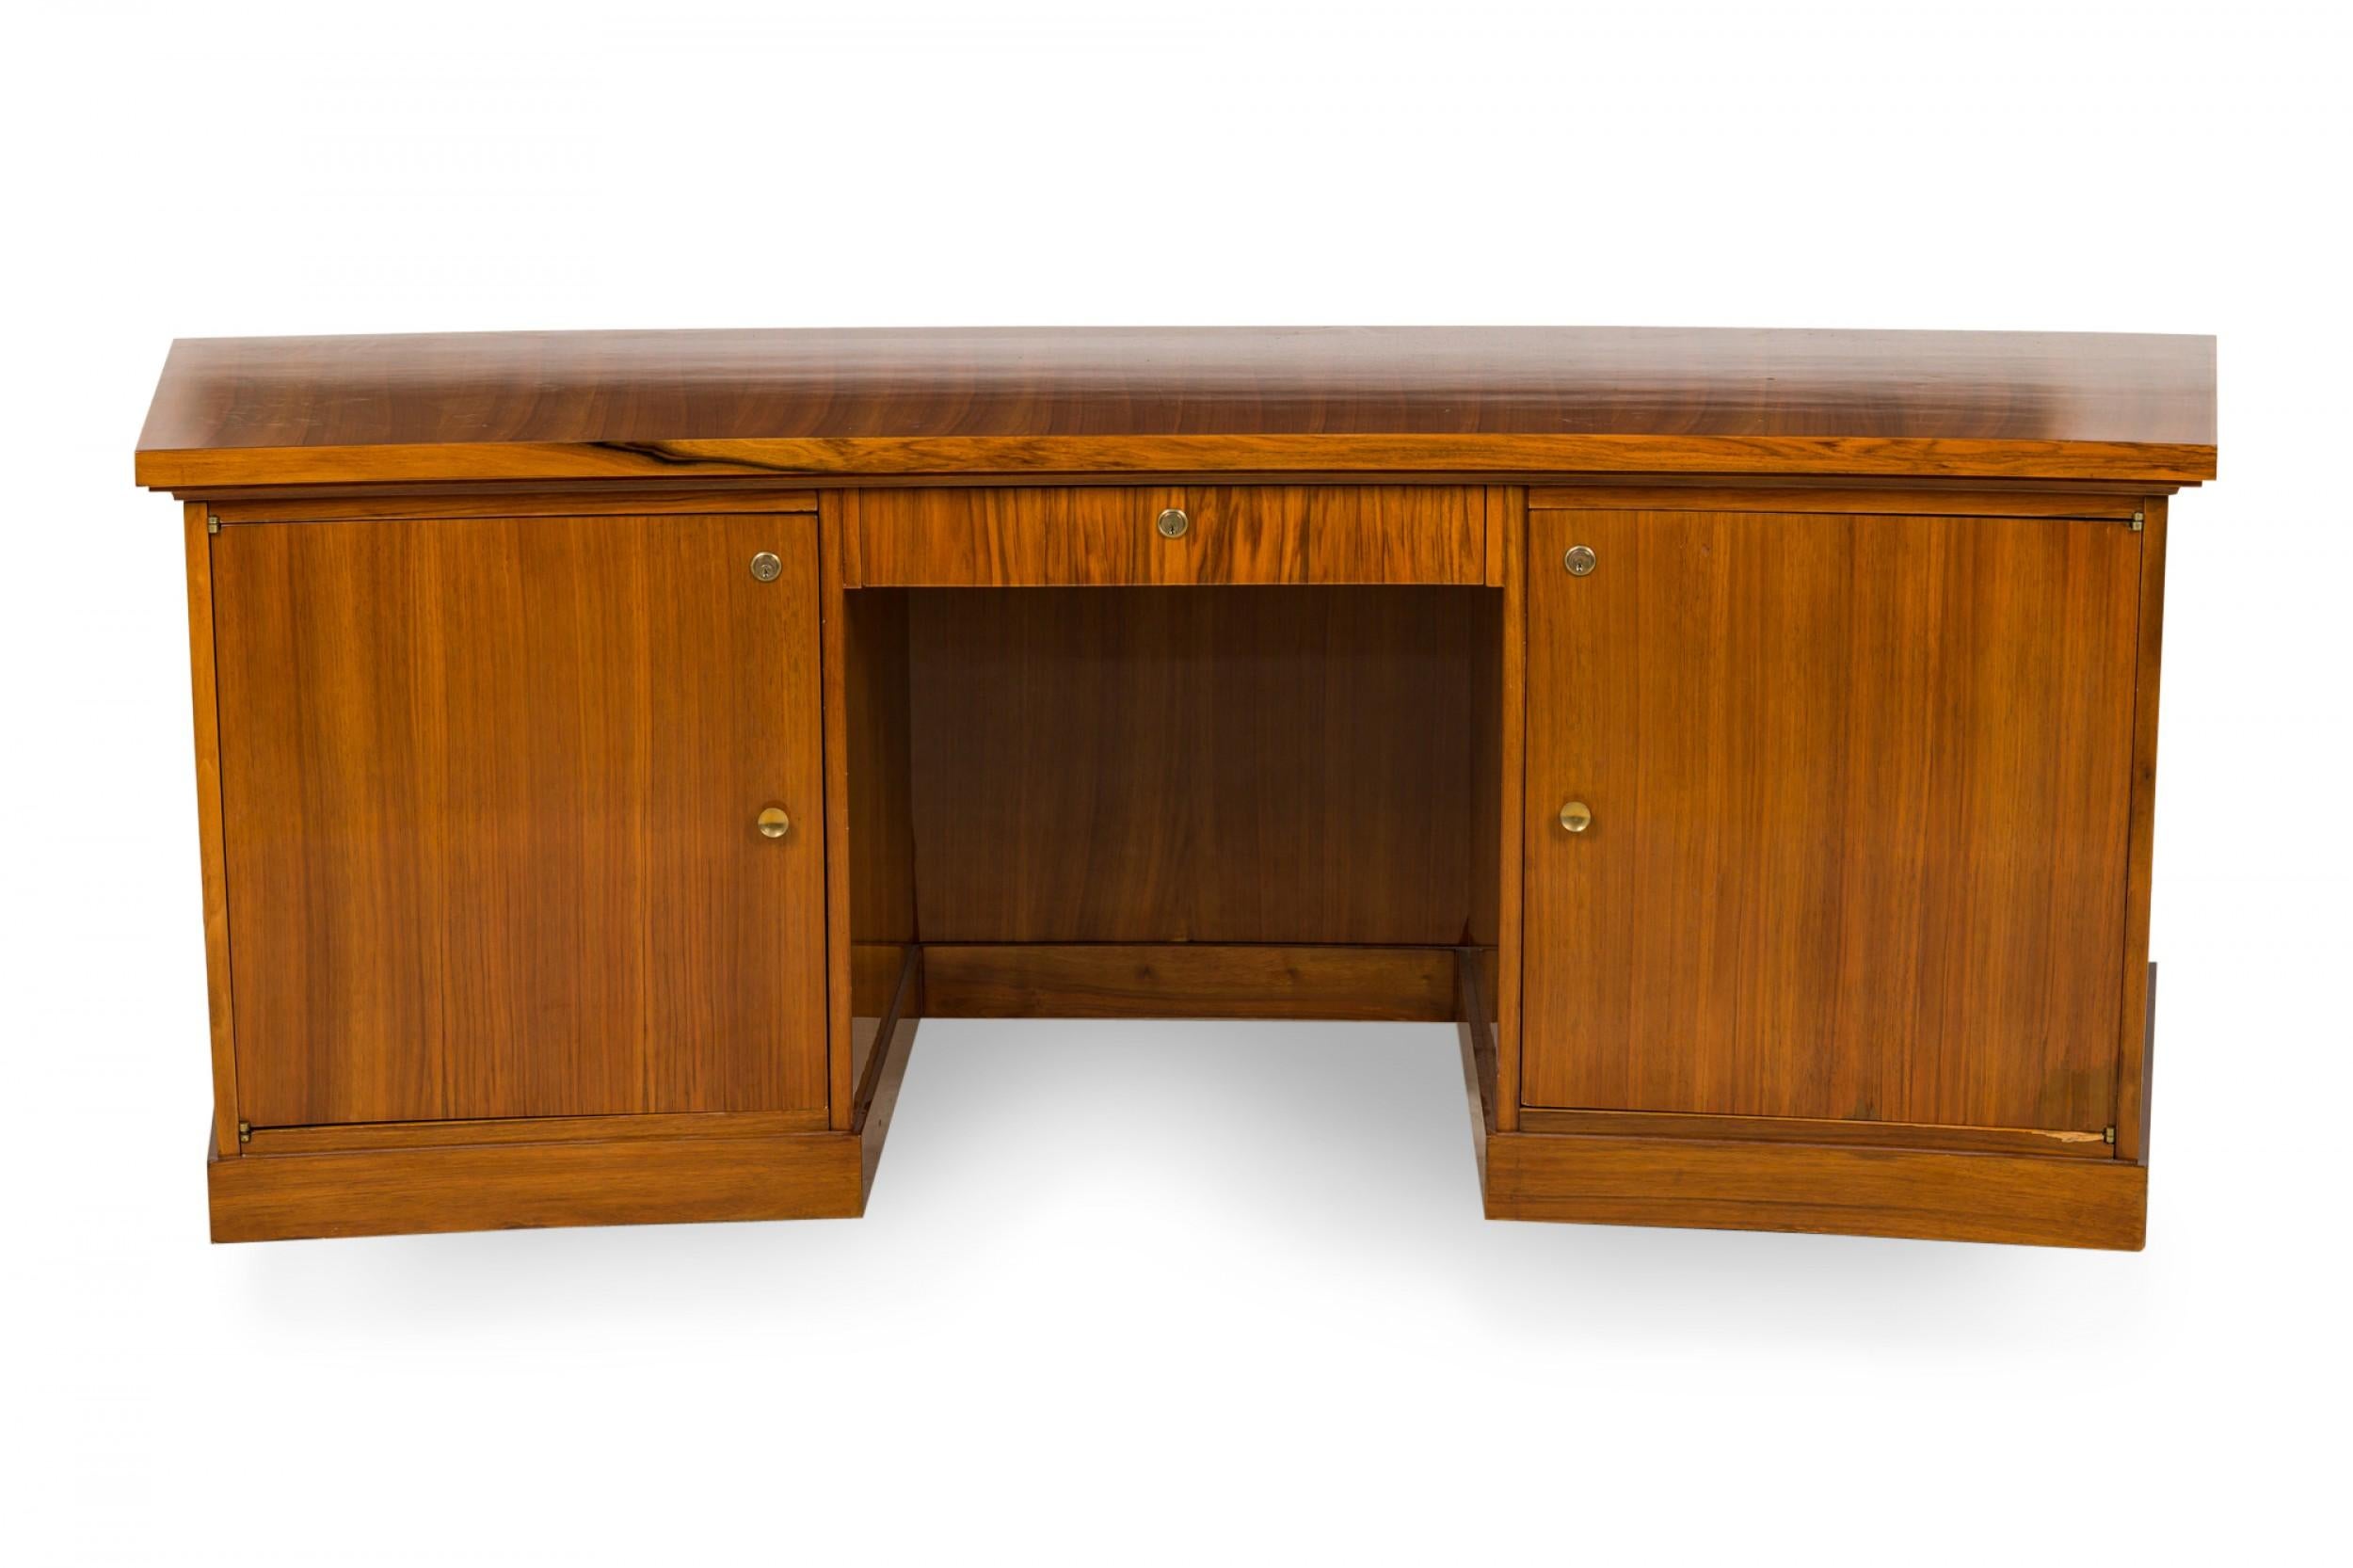 French Art Deco (circa 1945) executive desk with gently curved rectangular profile made of blond rosewood with bronze trim, containing two lockable cabinets, the left containing two shelves and the right concealing three interior drawers, and a